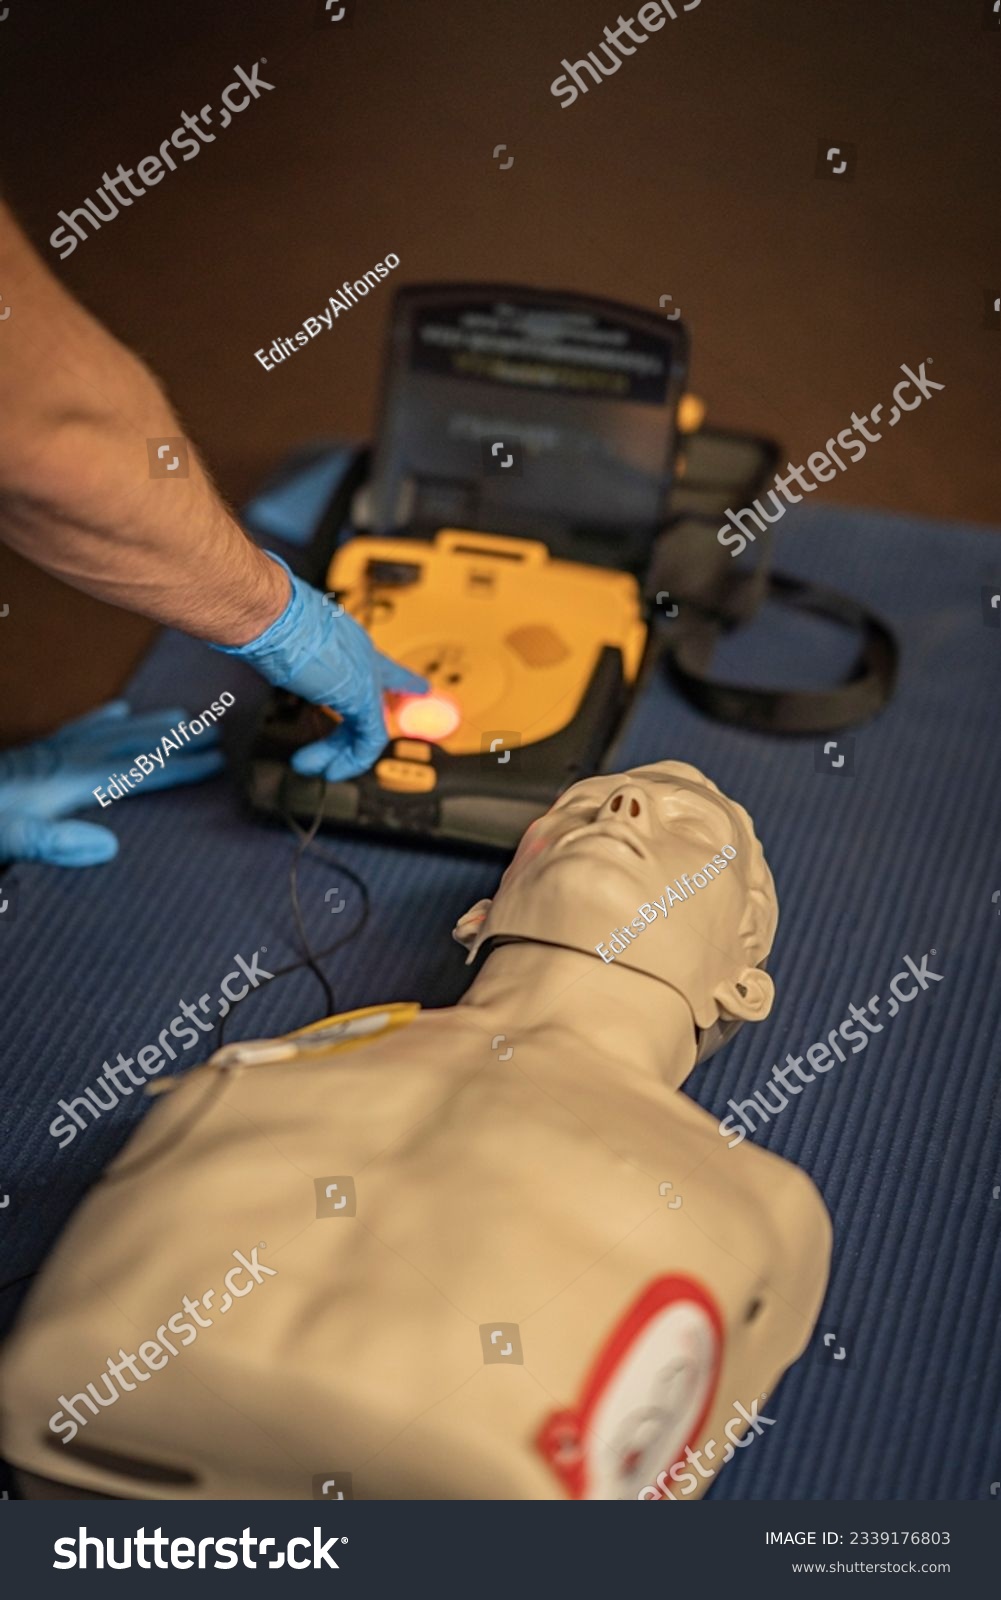 First aid training – The resusitation has started. The instructor ist going to activate the shock. The shock discharge button flashes red. The AED is loaded and the patient is now being shocked. #2339176803